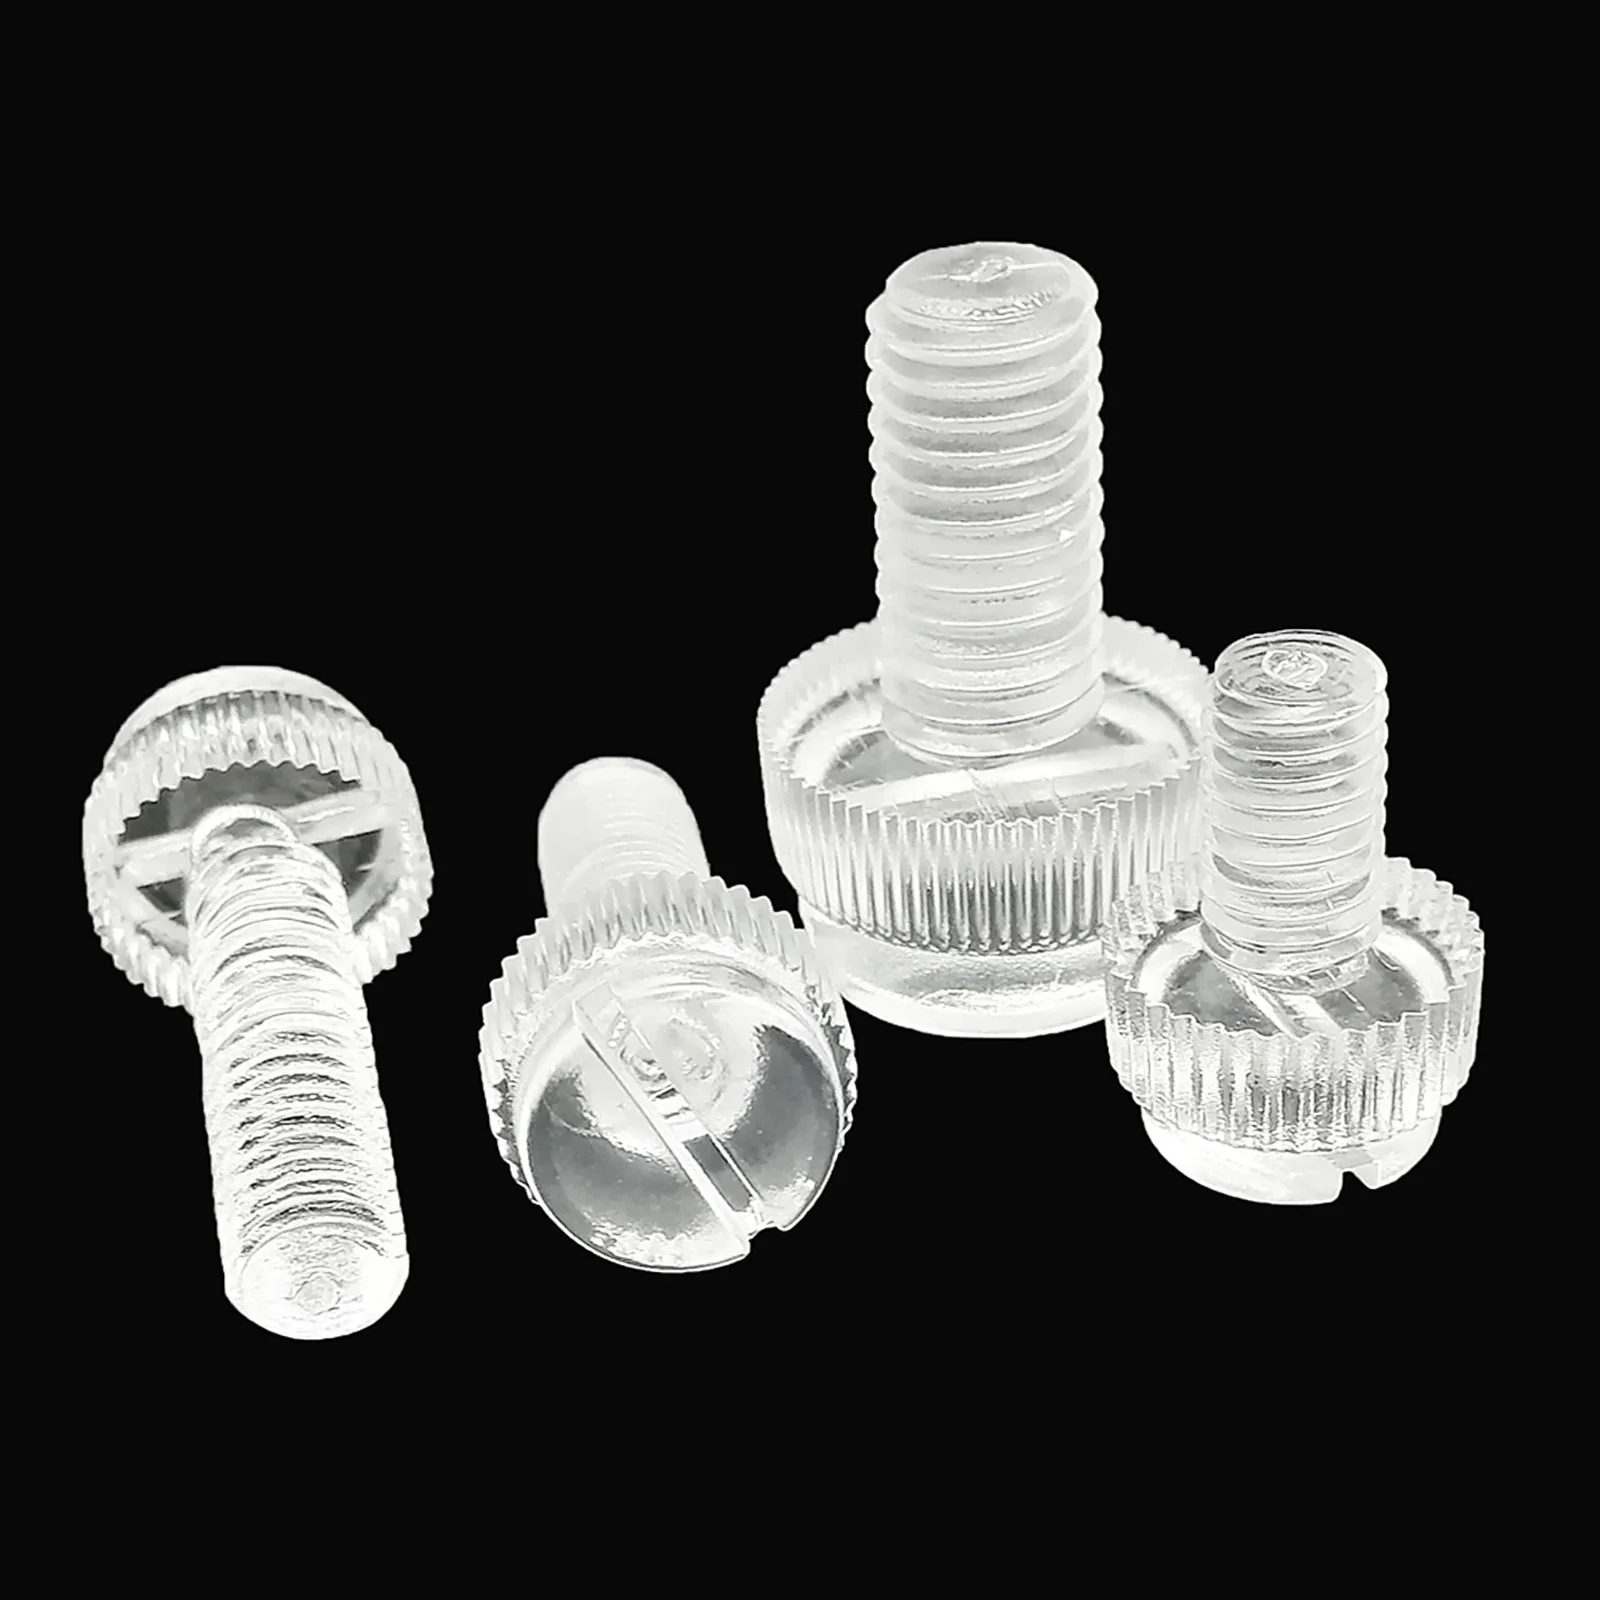 slotted+knurled M3 M4 M5 M6 M8 Lengths 10mm 60mm Acrylic Plastic Thumbscrews 